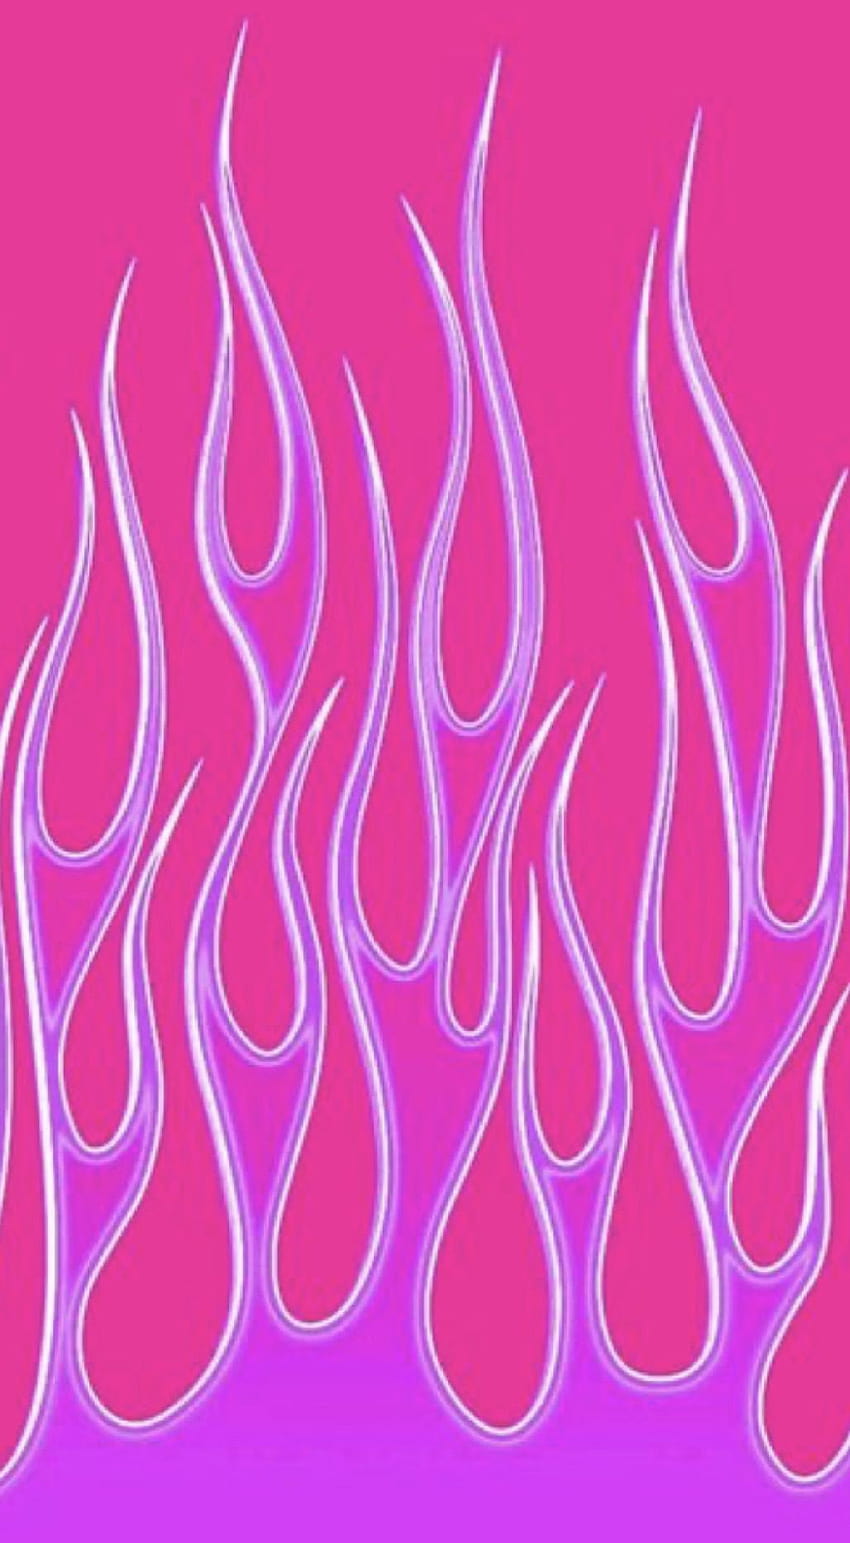 Neon Pink Fabric, Wallpaper and Home Decor | Spoonflower